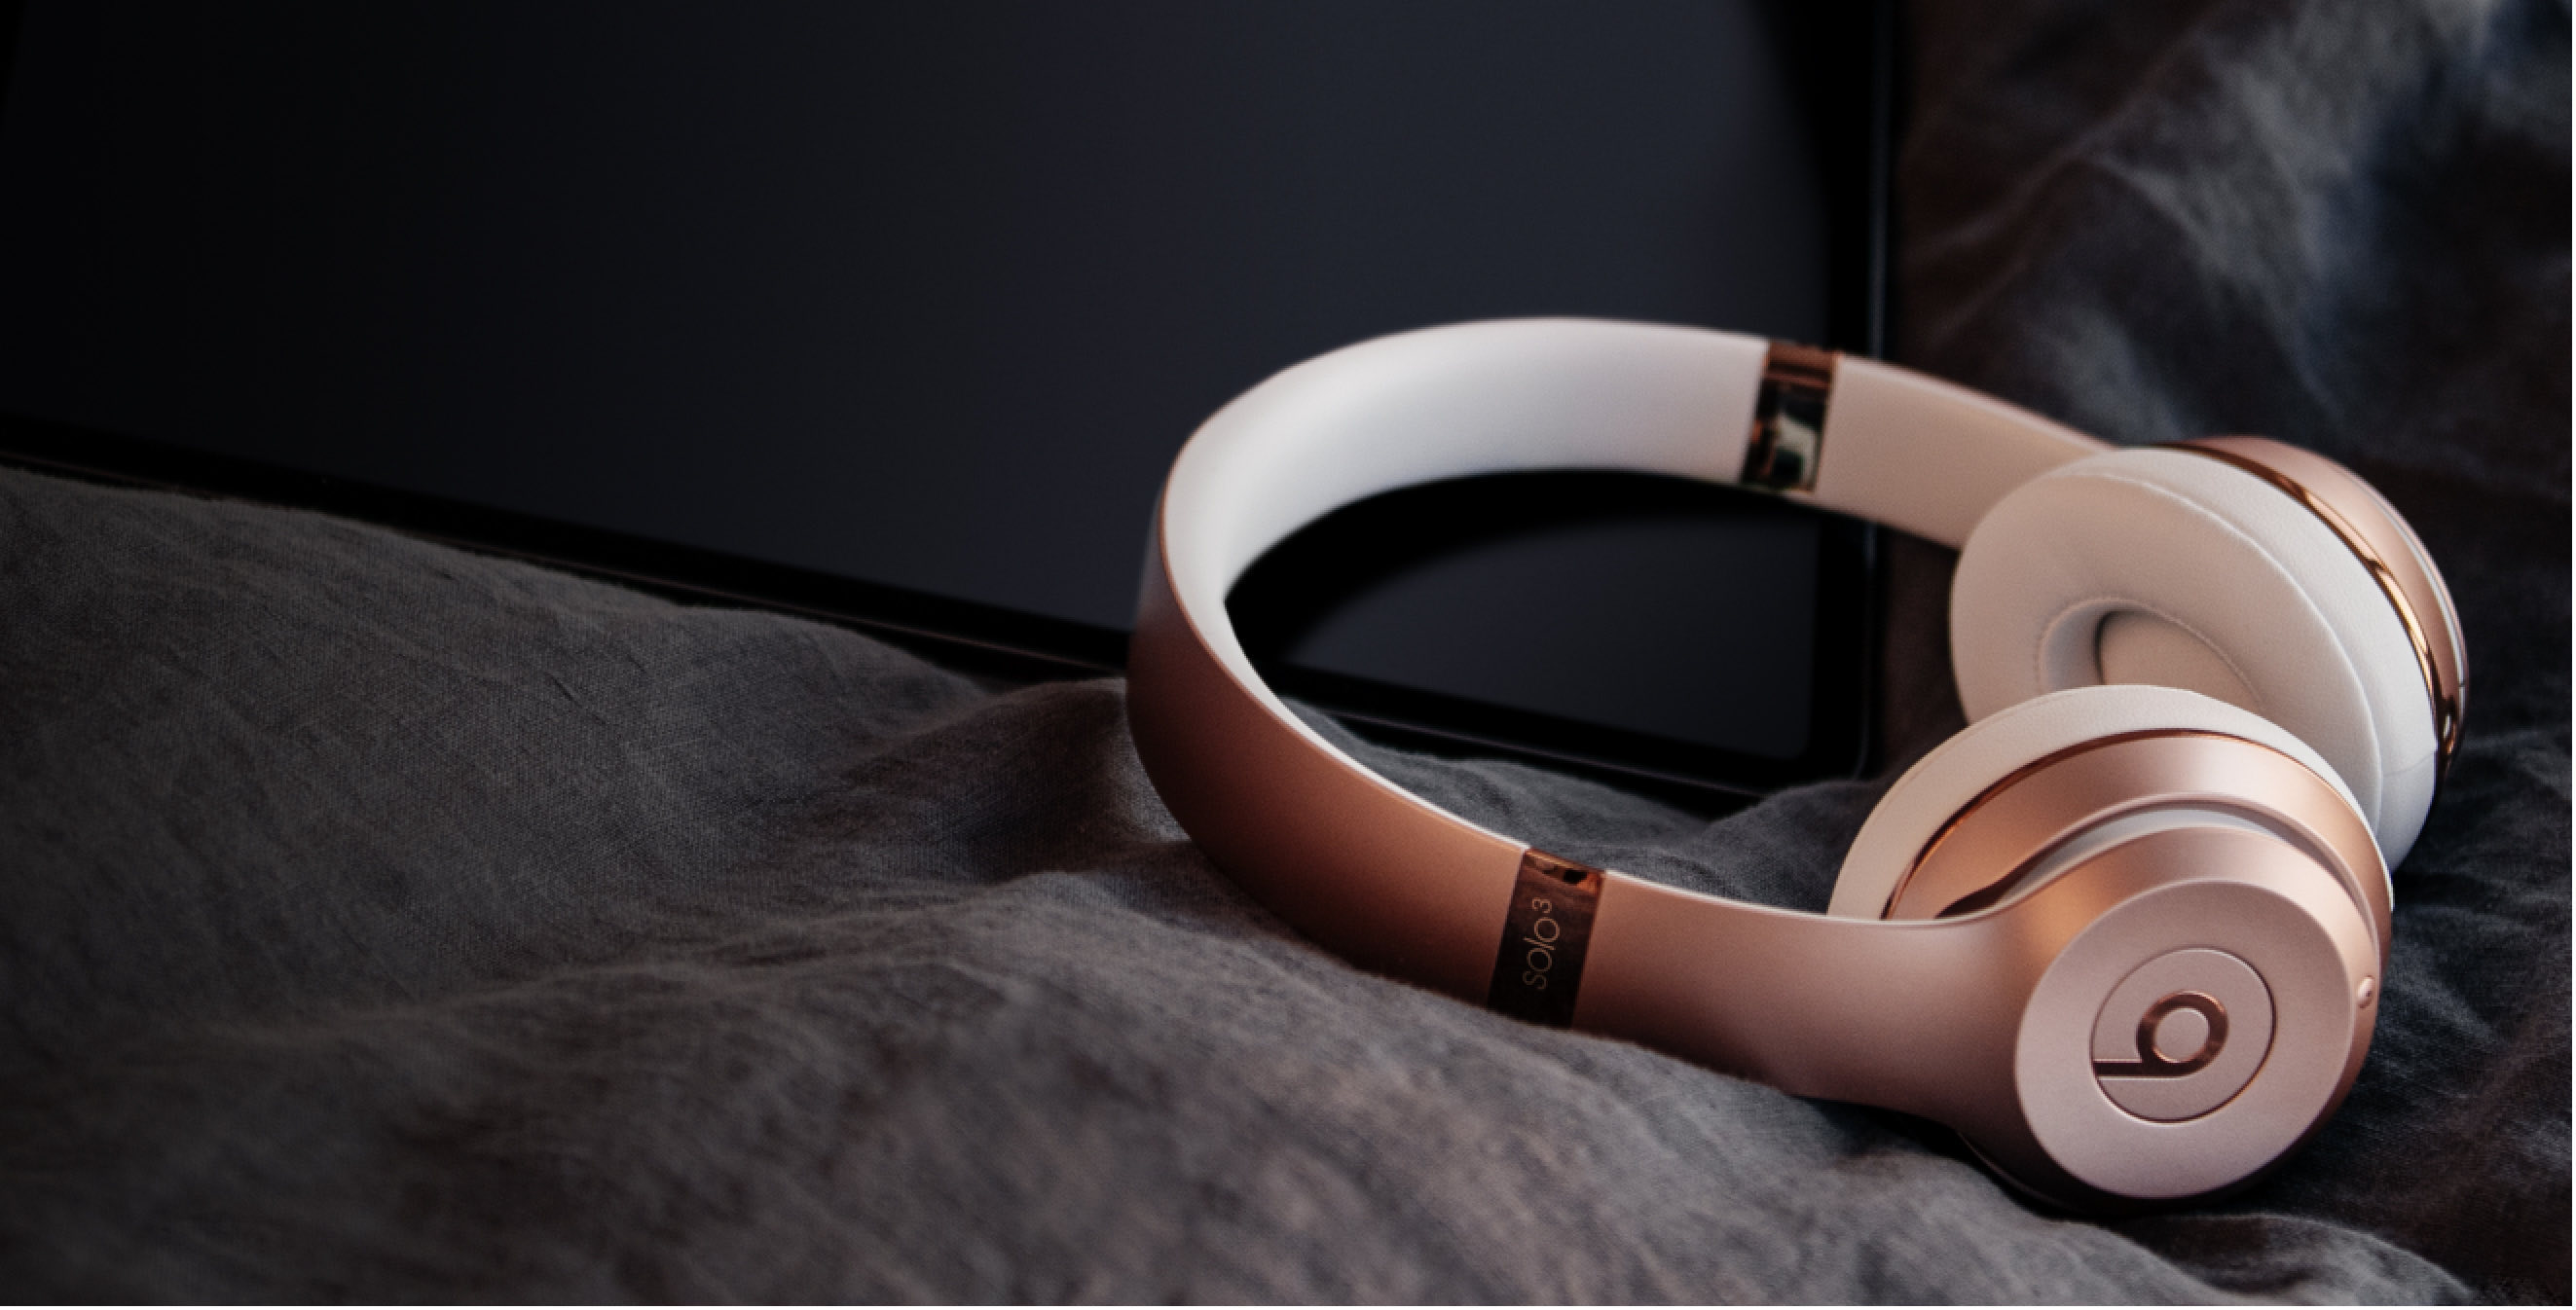 Beats Solo3 Wireless headphones in rose gold shown lying down